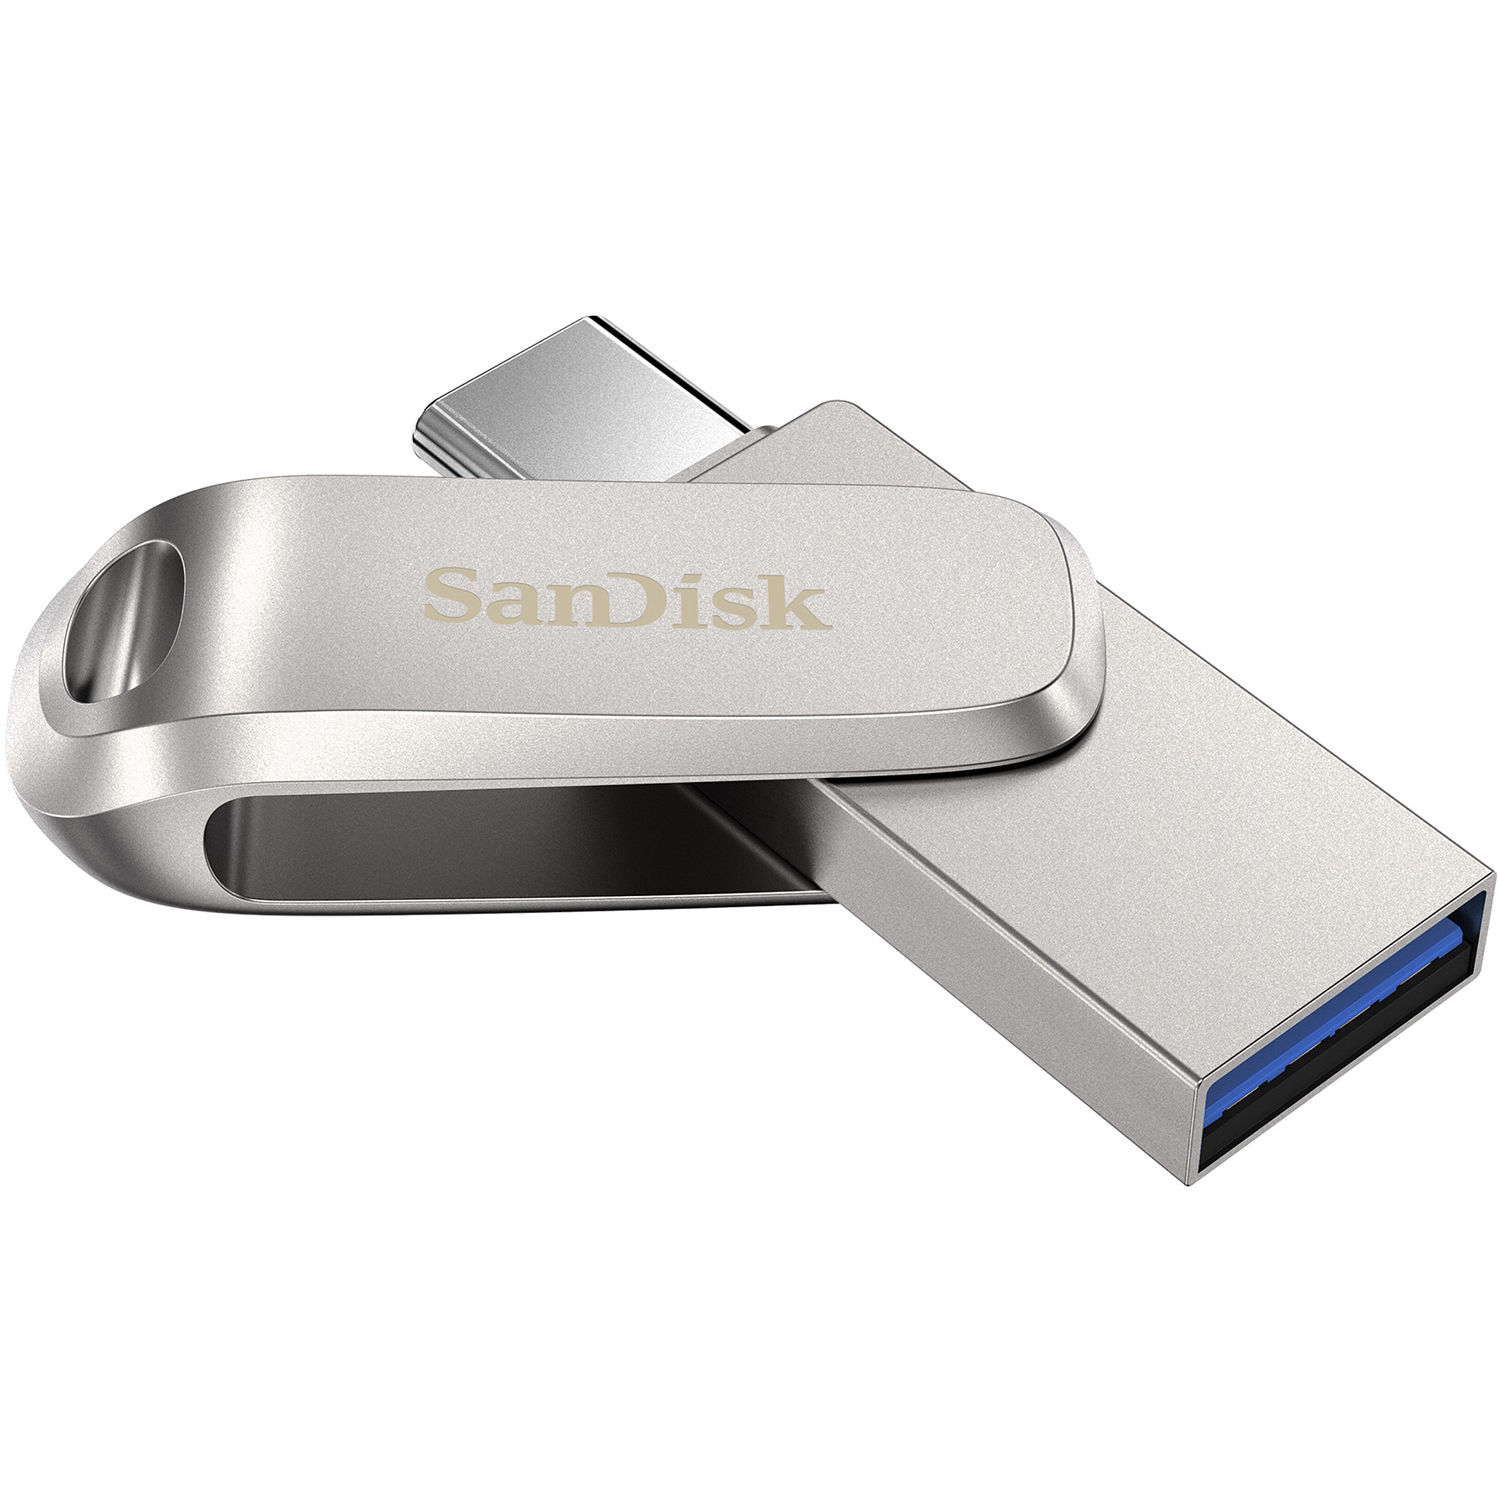 Sandisk Ultra Dual Drive Luxe Usb 3.1 Flash Drive 64Gb Usb Type C Type a